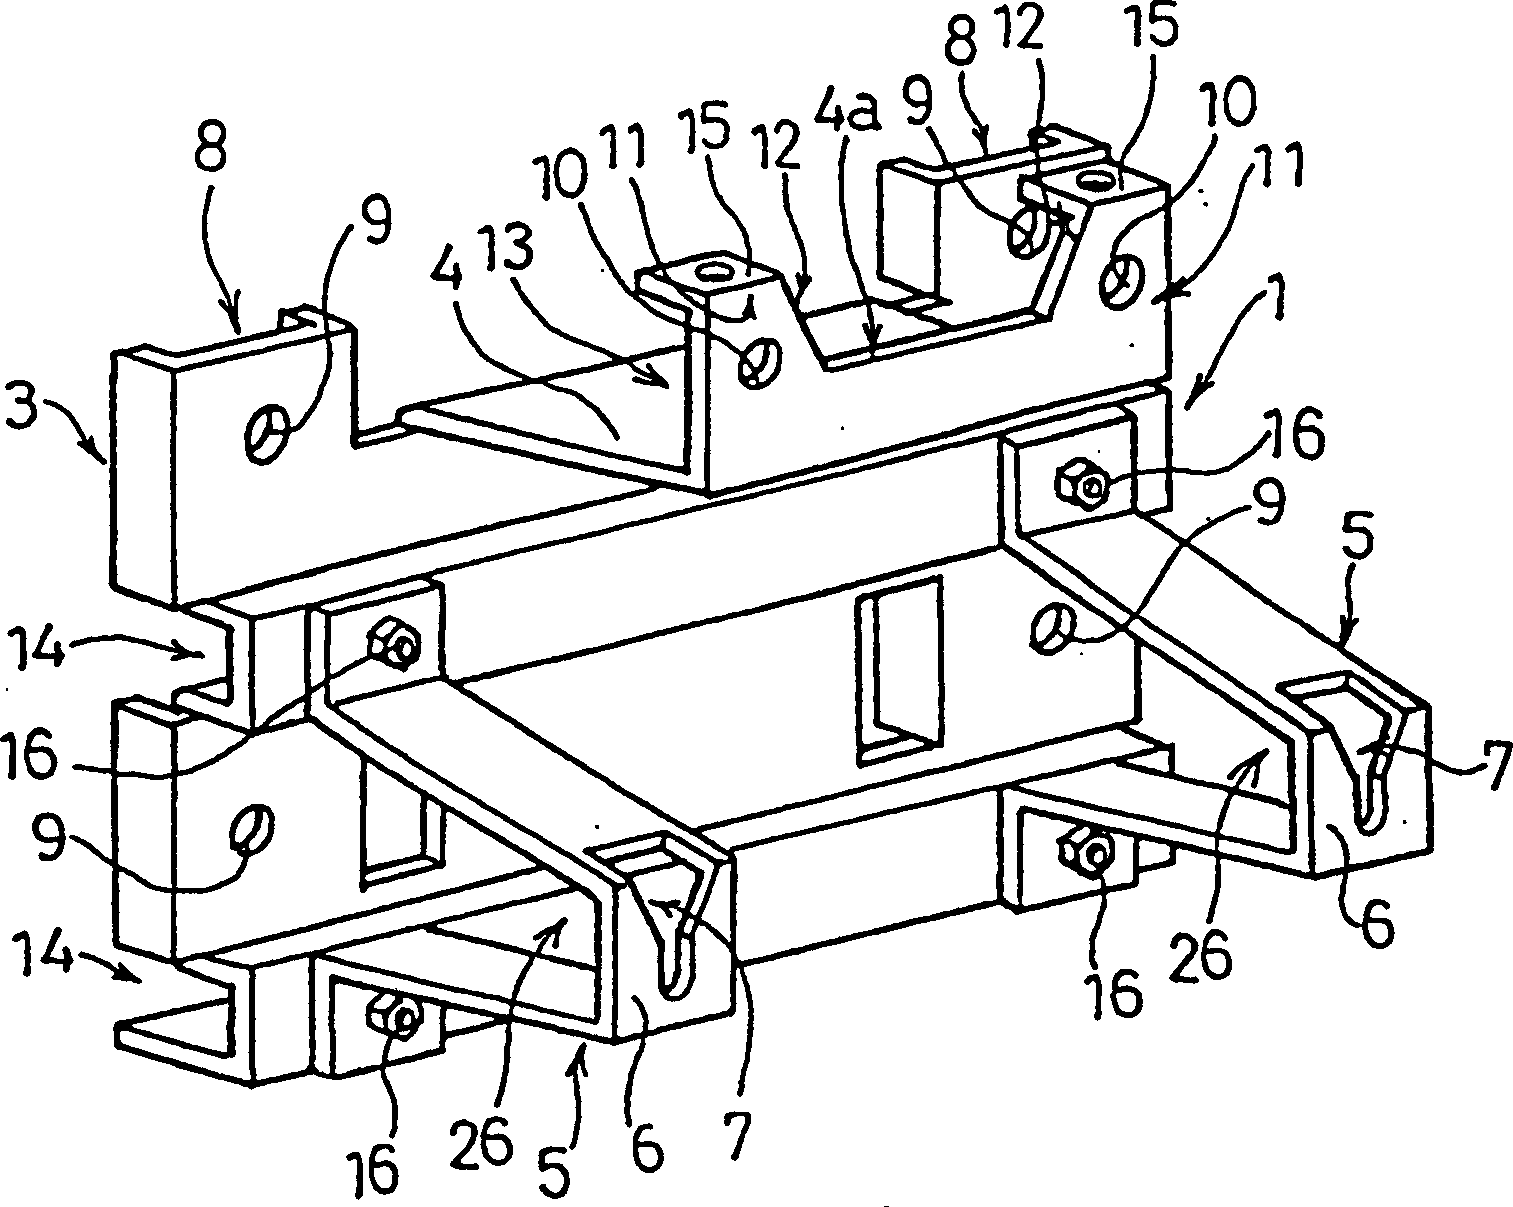 Support for fitting out door unit of split air conditioner